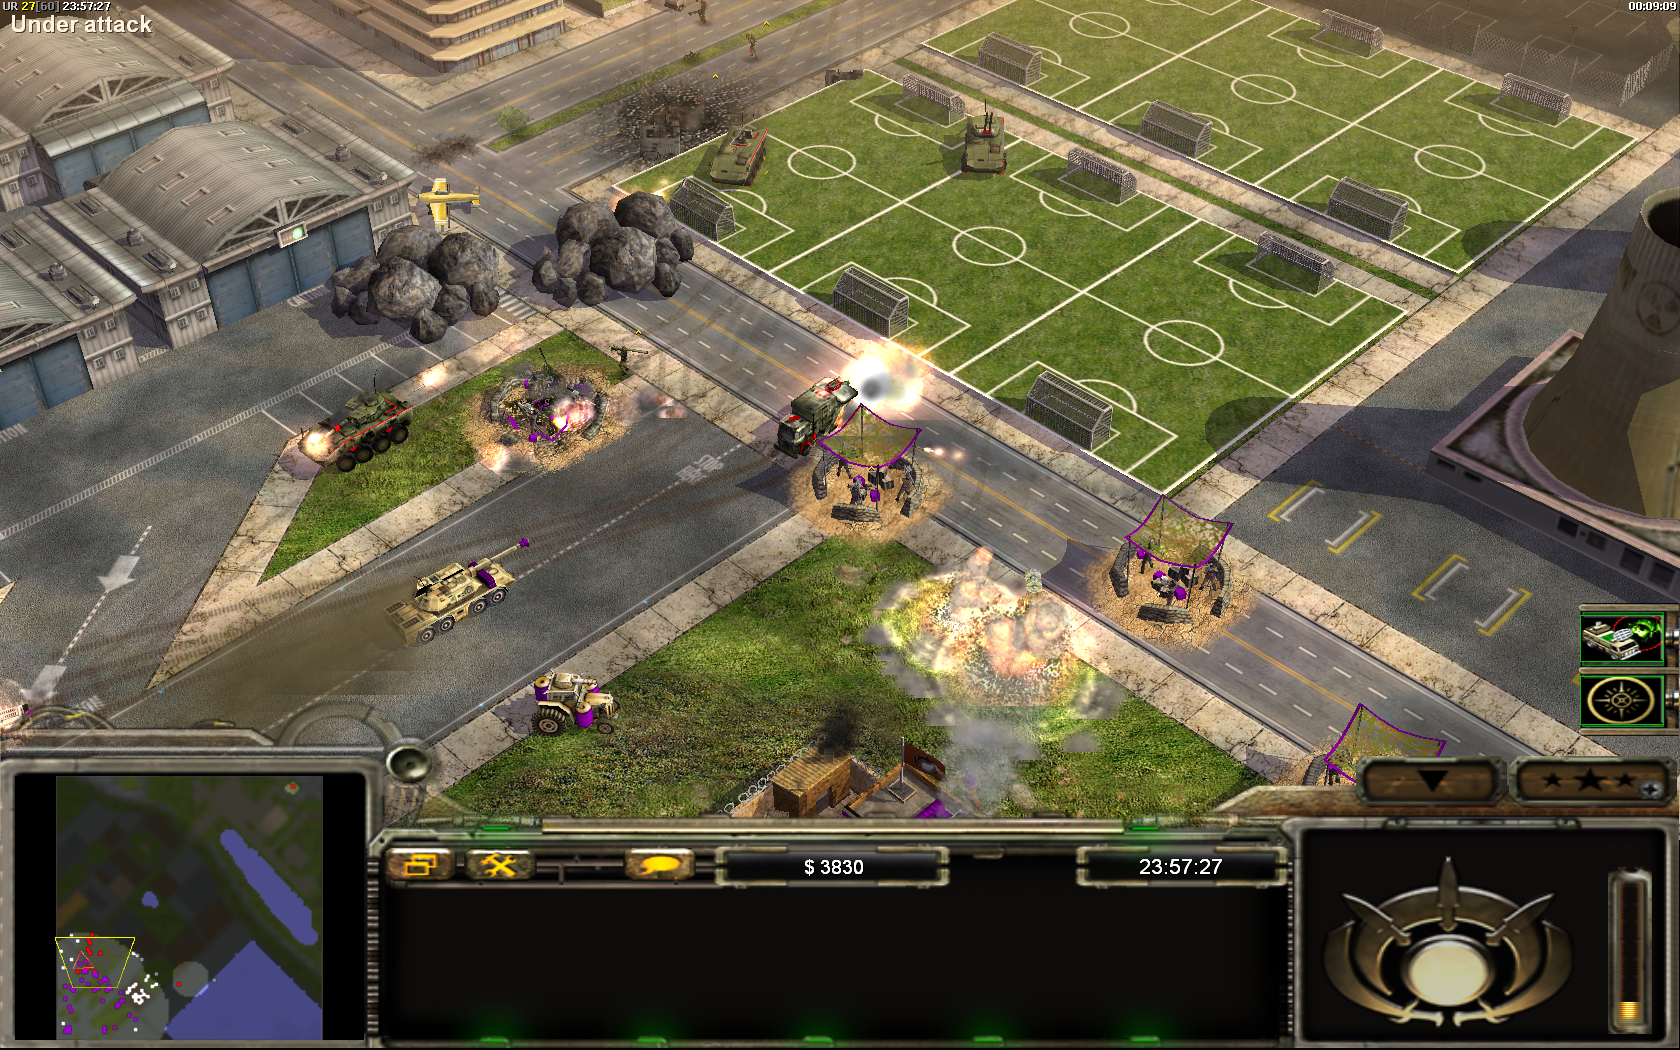 Command and Conquer Zero hour contra 009. Command Conquer Generals Контра 009. Command and Conquer Generals Zero hour contra 009. Генералы Зеро хоур Контра 009.